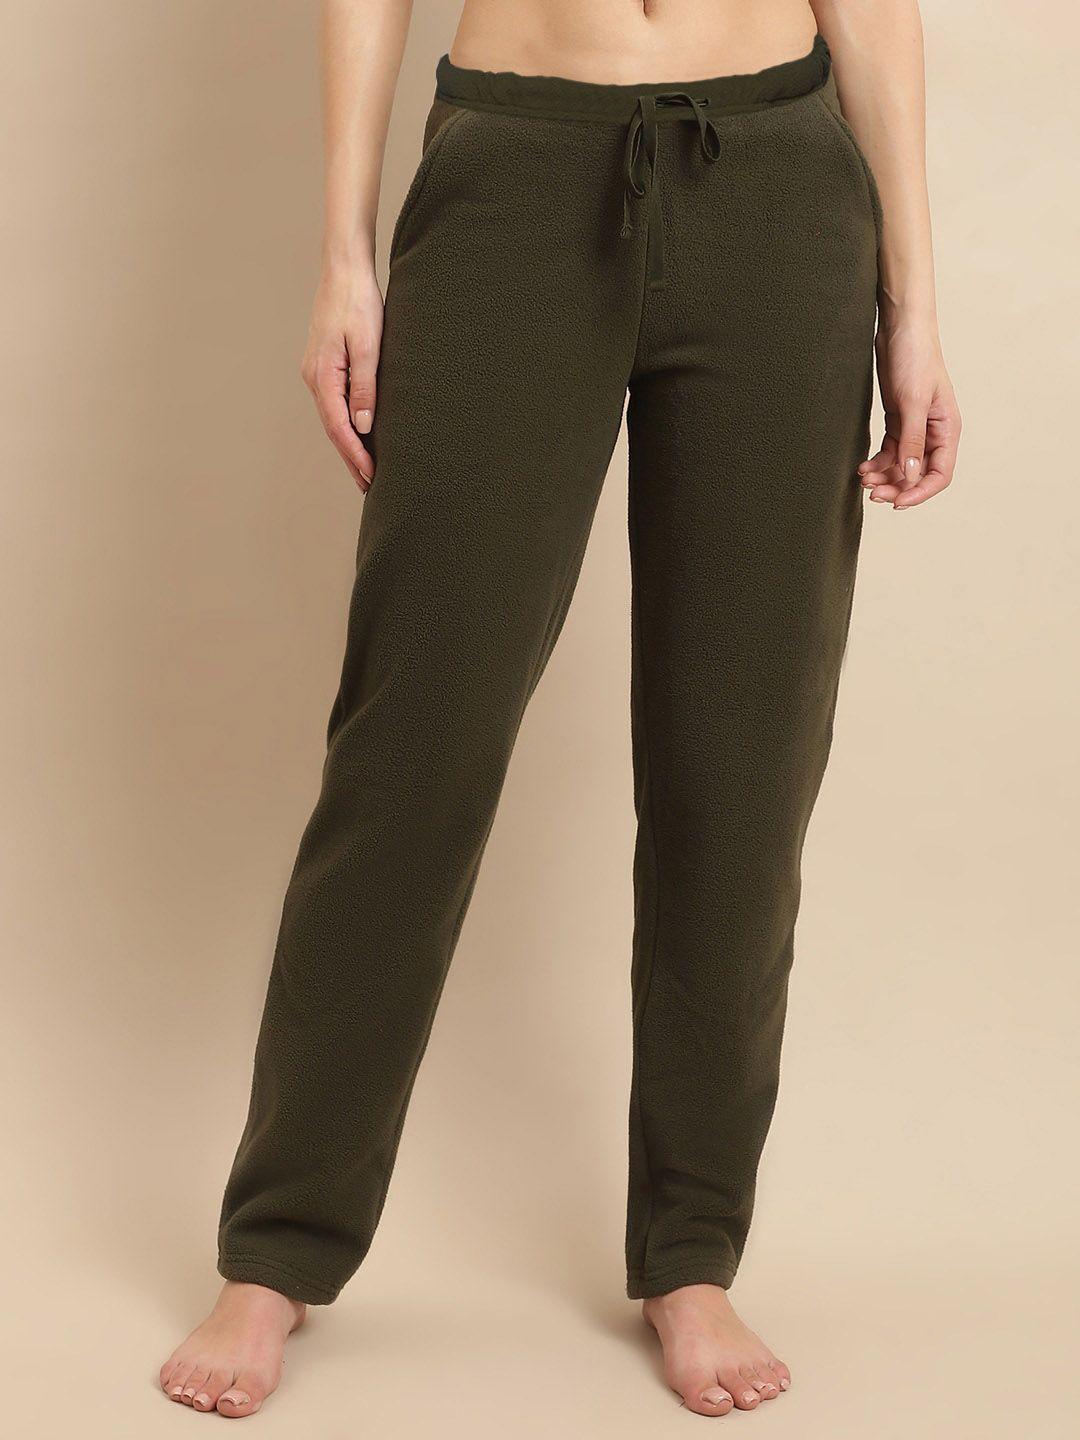 kanvin women olive green mid-rise straight lounge pants